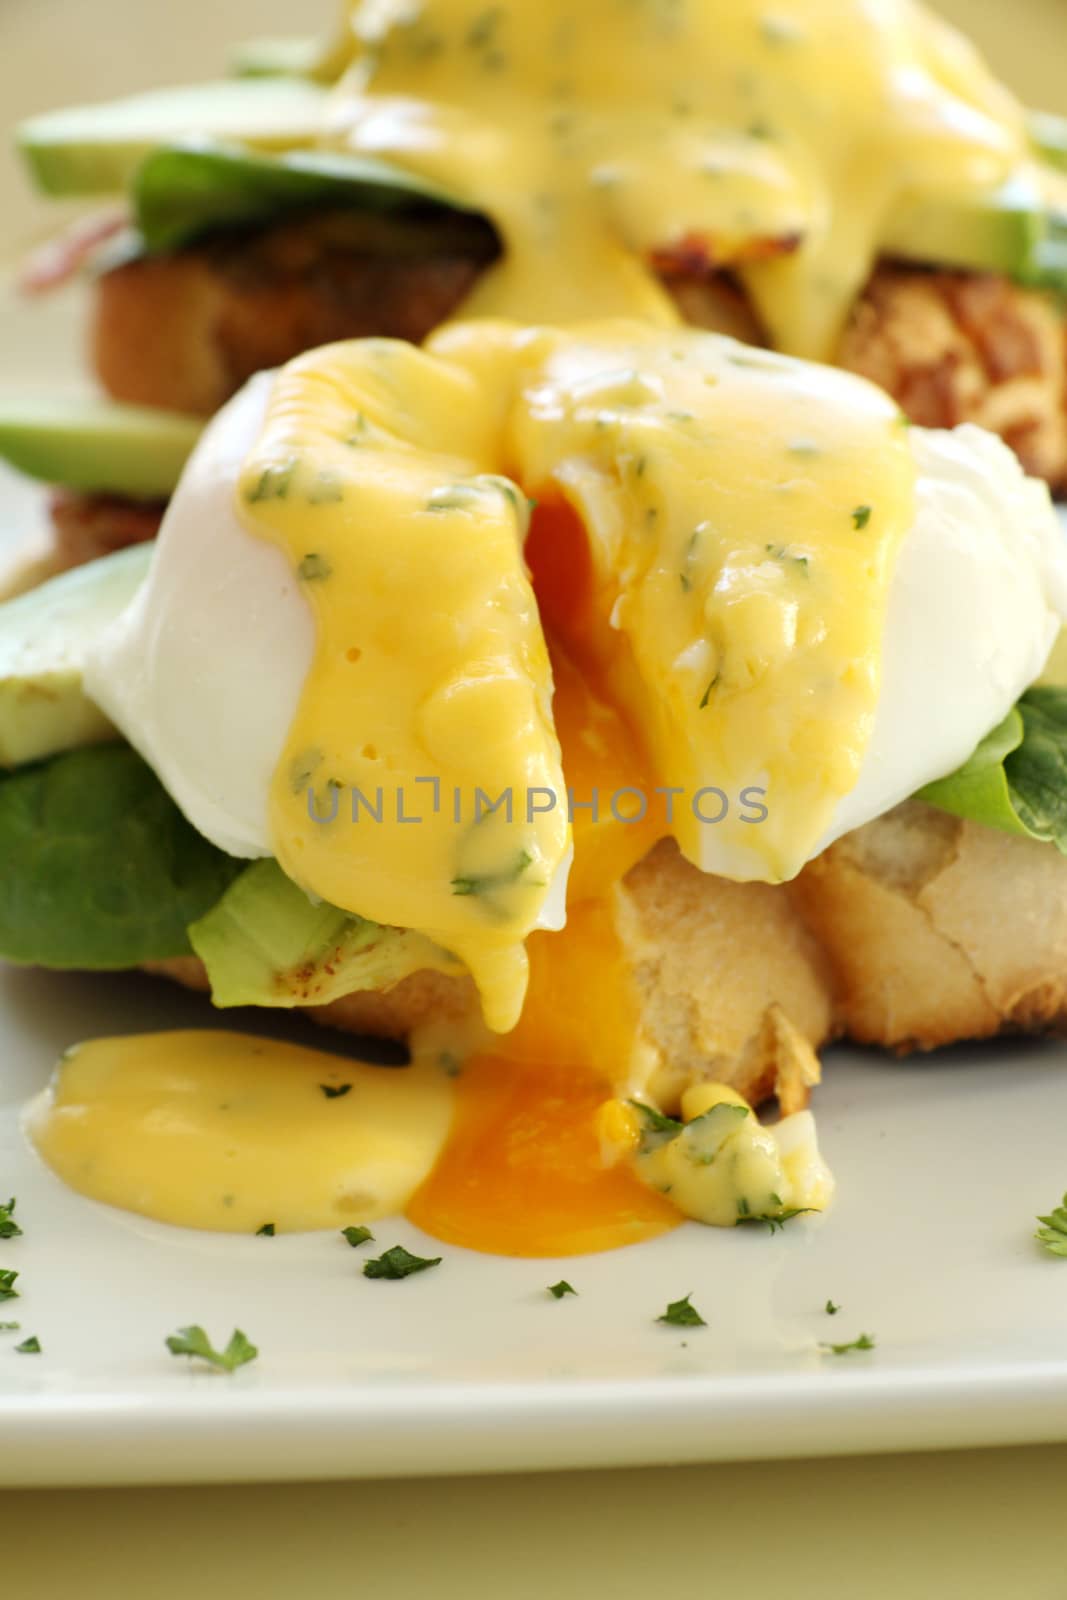 Delicious eggs benedict with hollandaise sauce with avocado with egg yolk.